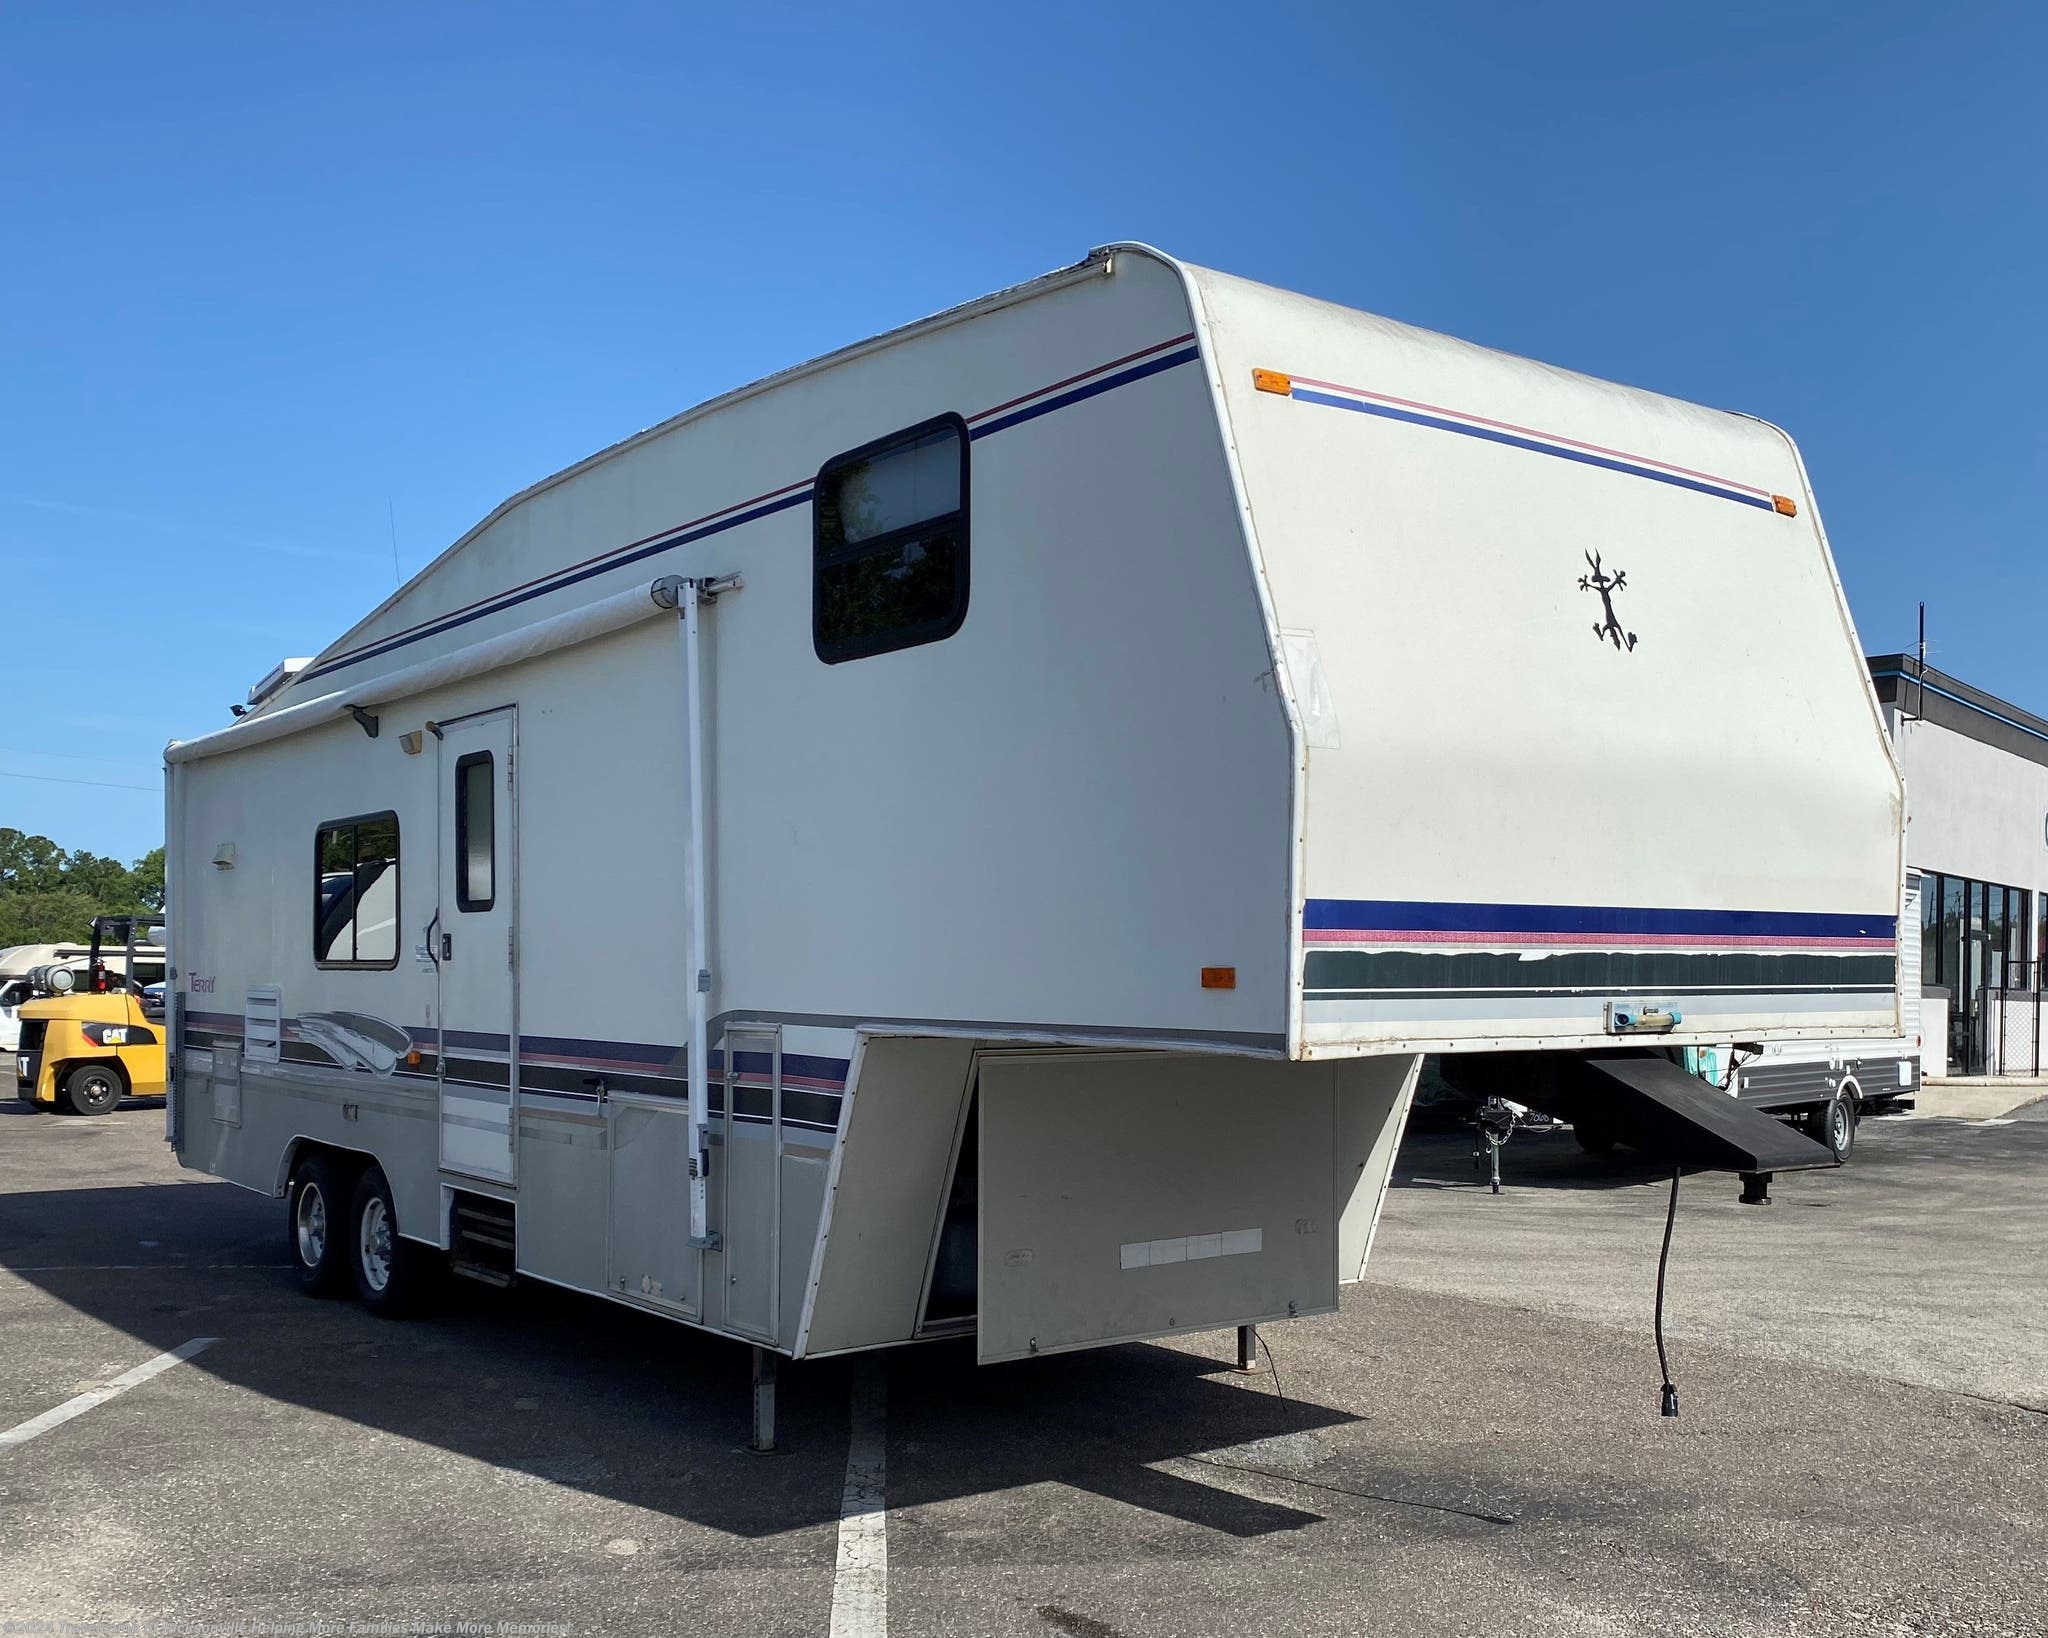 1997 Fleetwood Terry 30 5X RV for Sale in Jacksonville, FL 32216 1997 Terry Travel Trailer Owners Manual